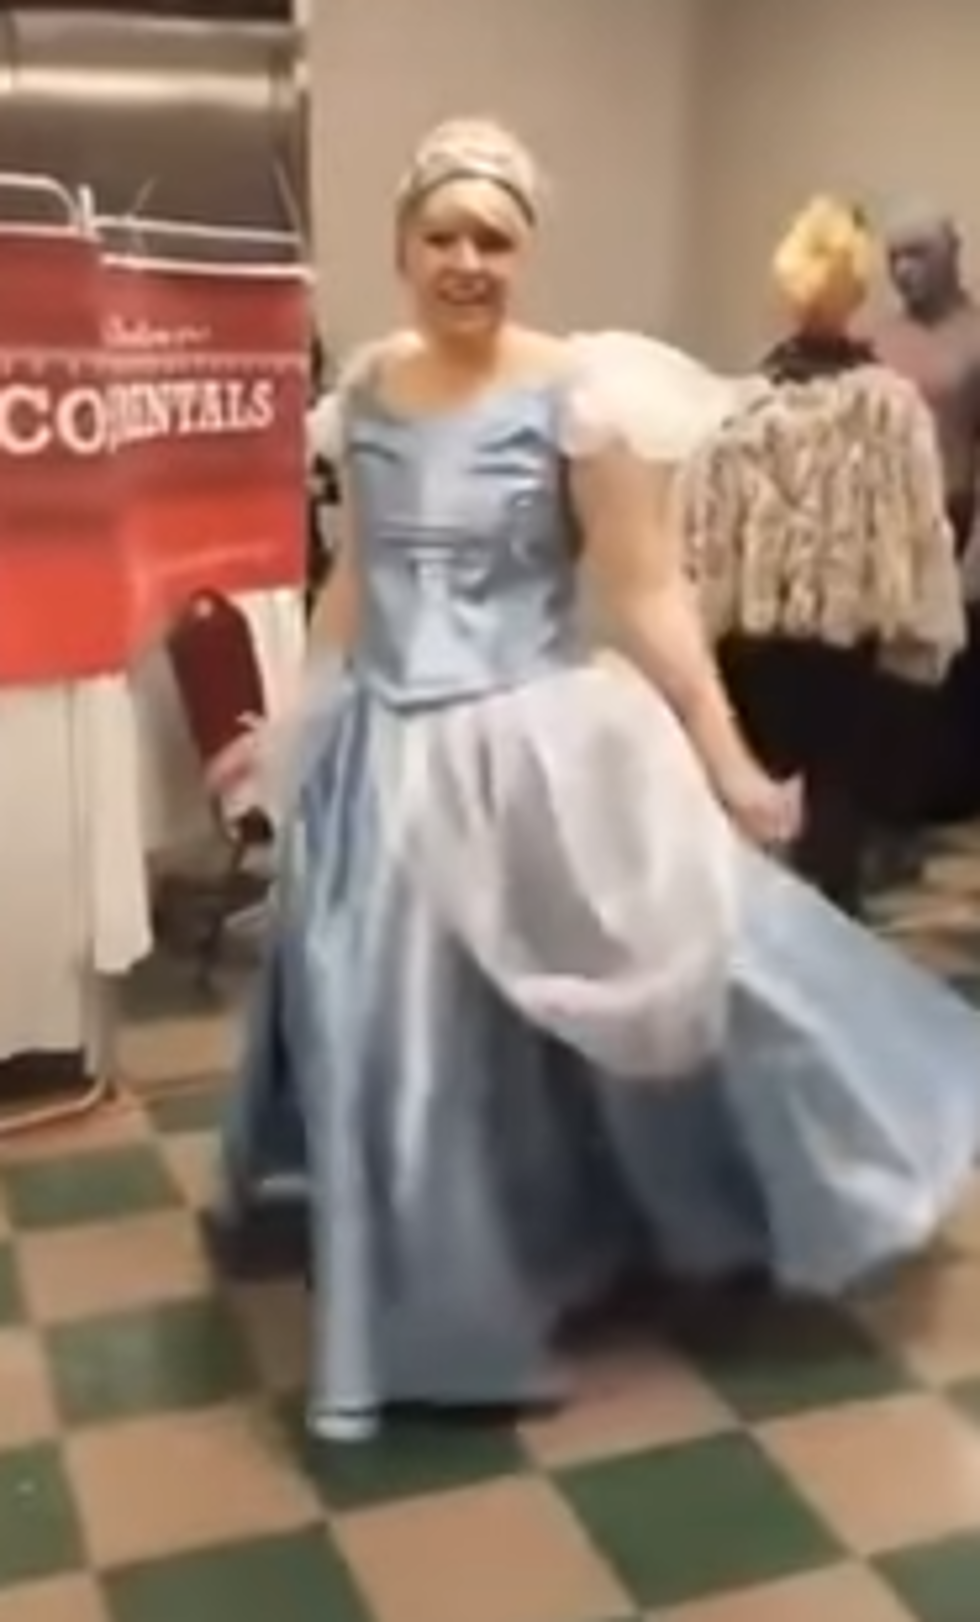 Cinderella Transformation In Only 19 Seconds [VIDEO]